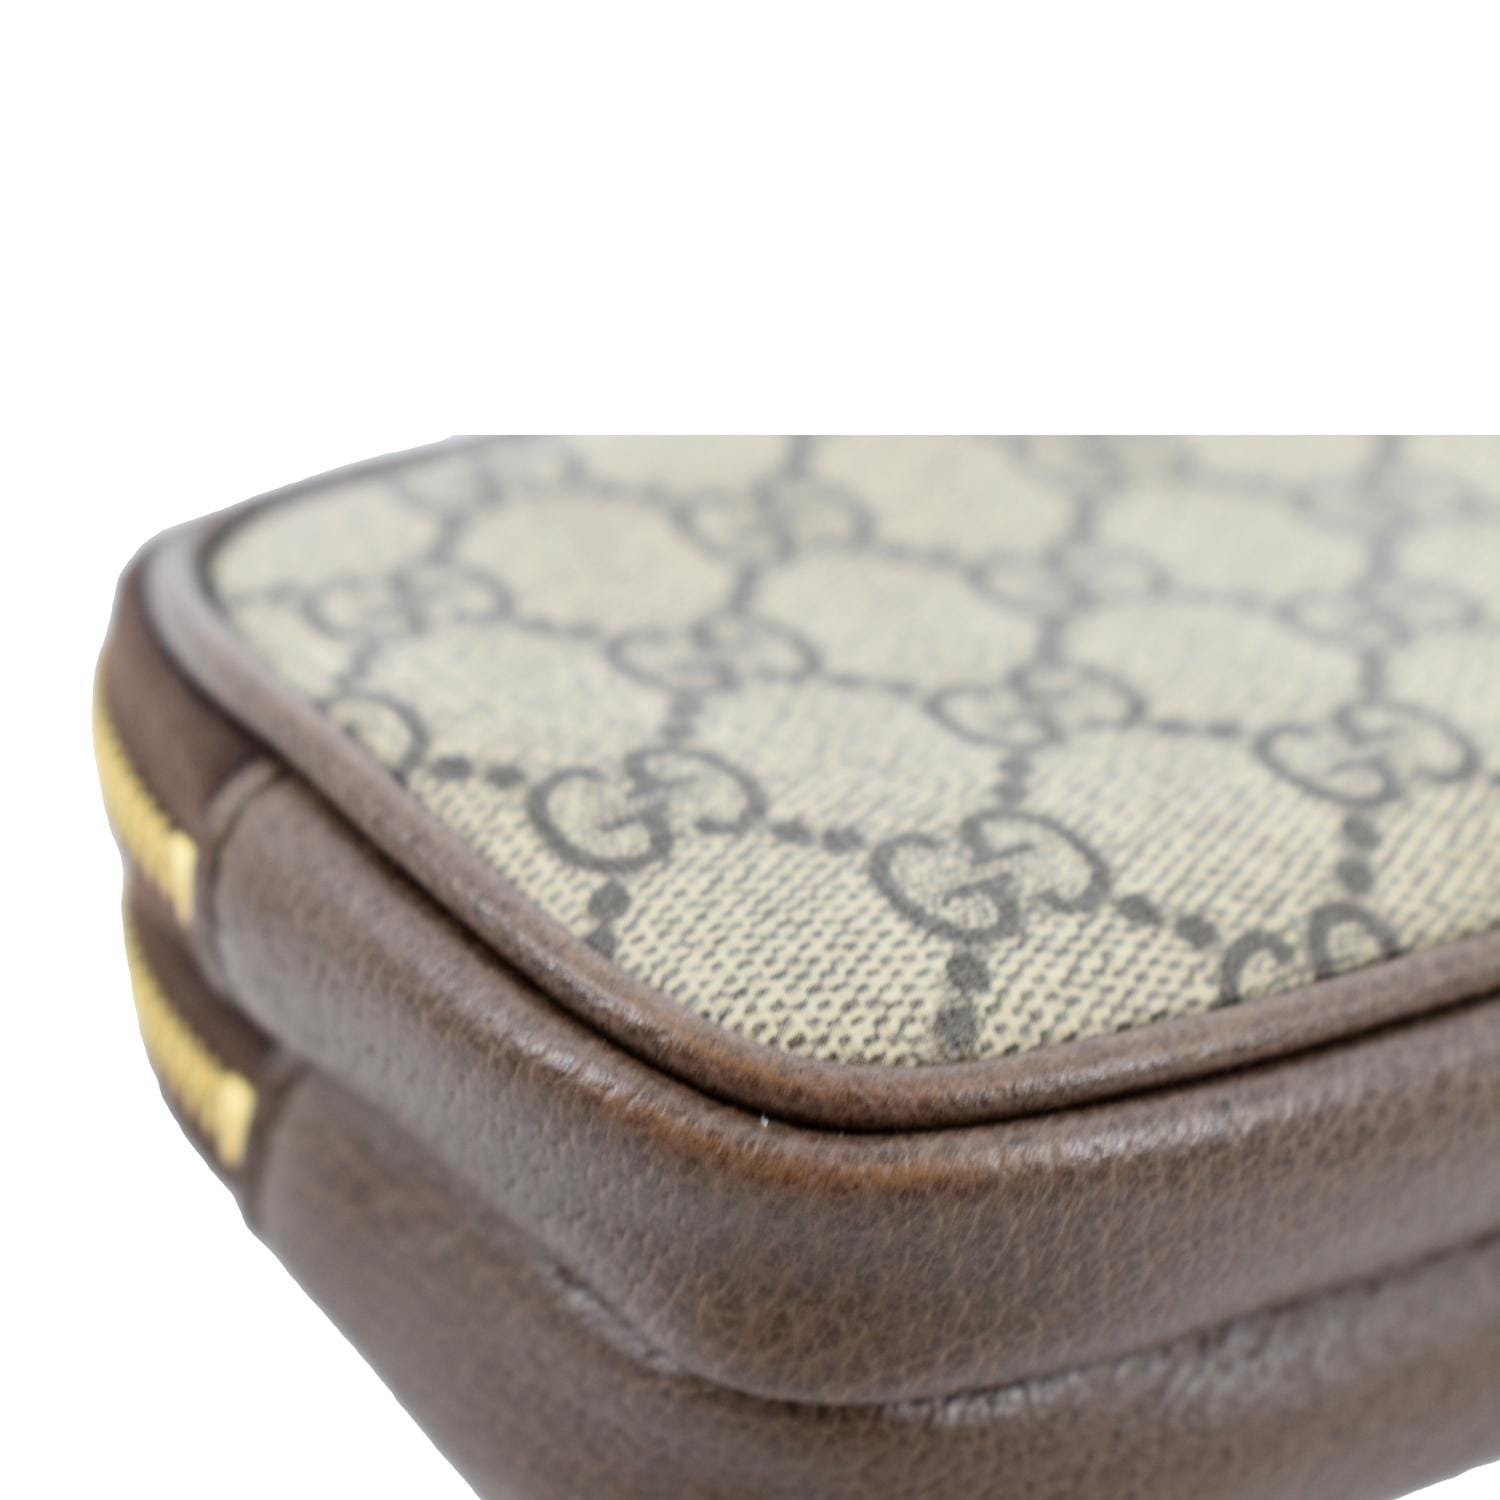 Shop GUCCI Ophidia toiletry case ( 739670 UULBN 1244, 739670 UULBN 1244) by  みのまいッシュ